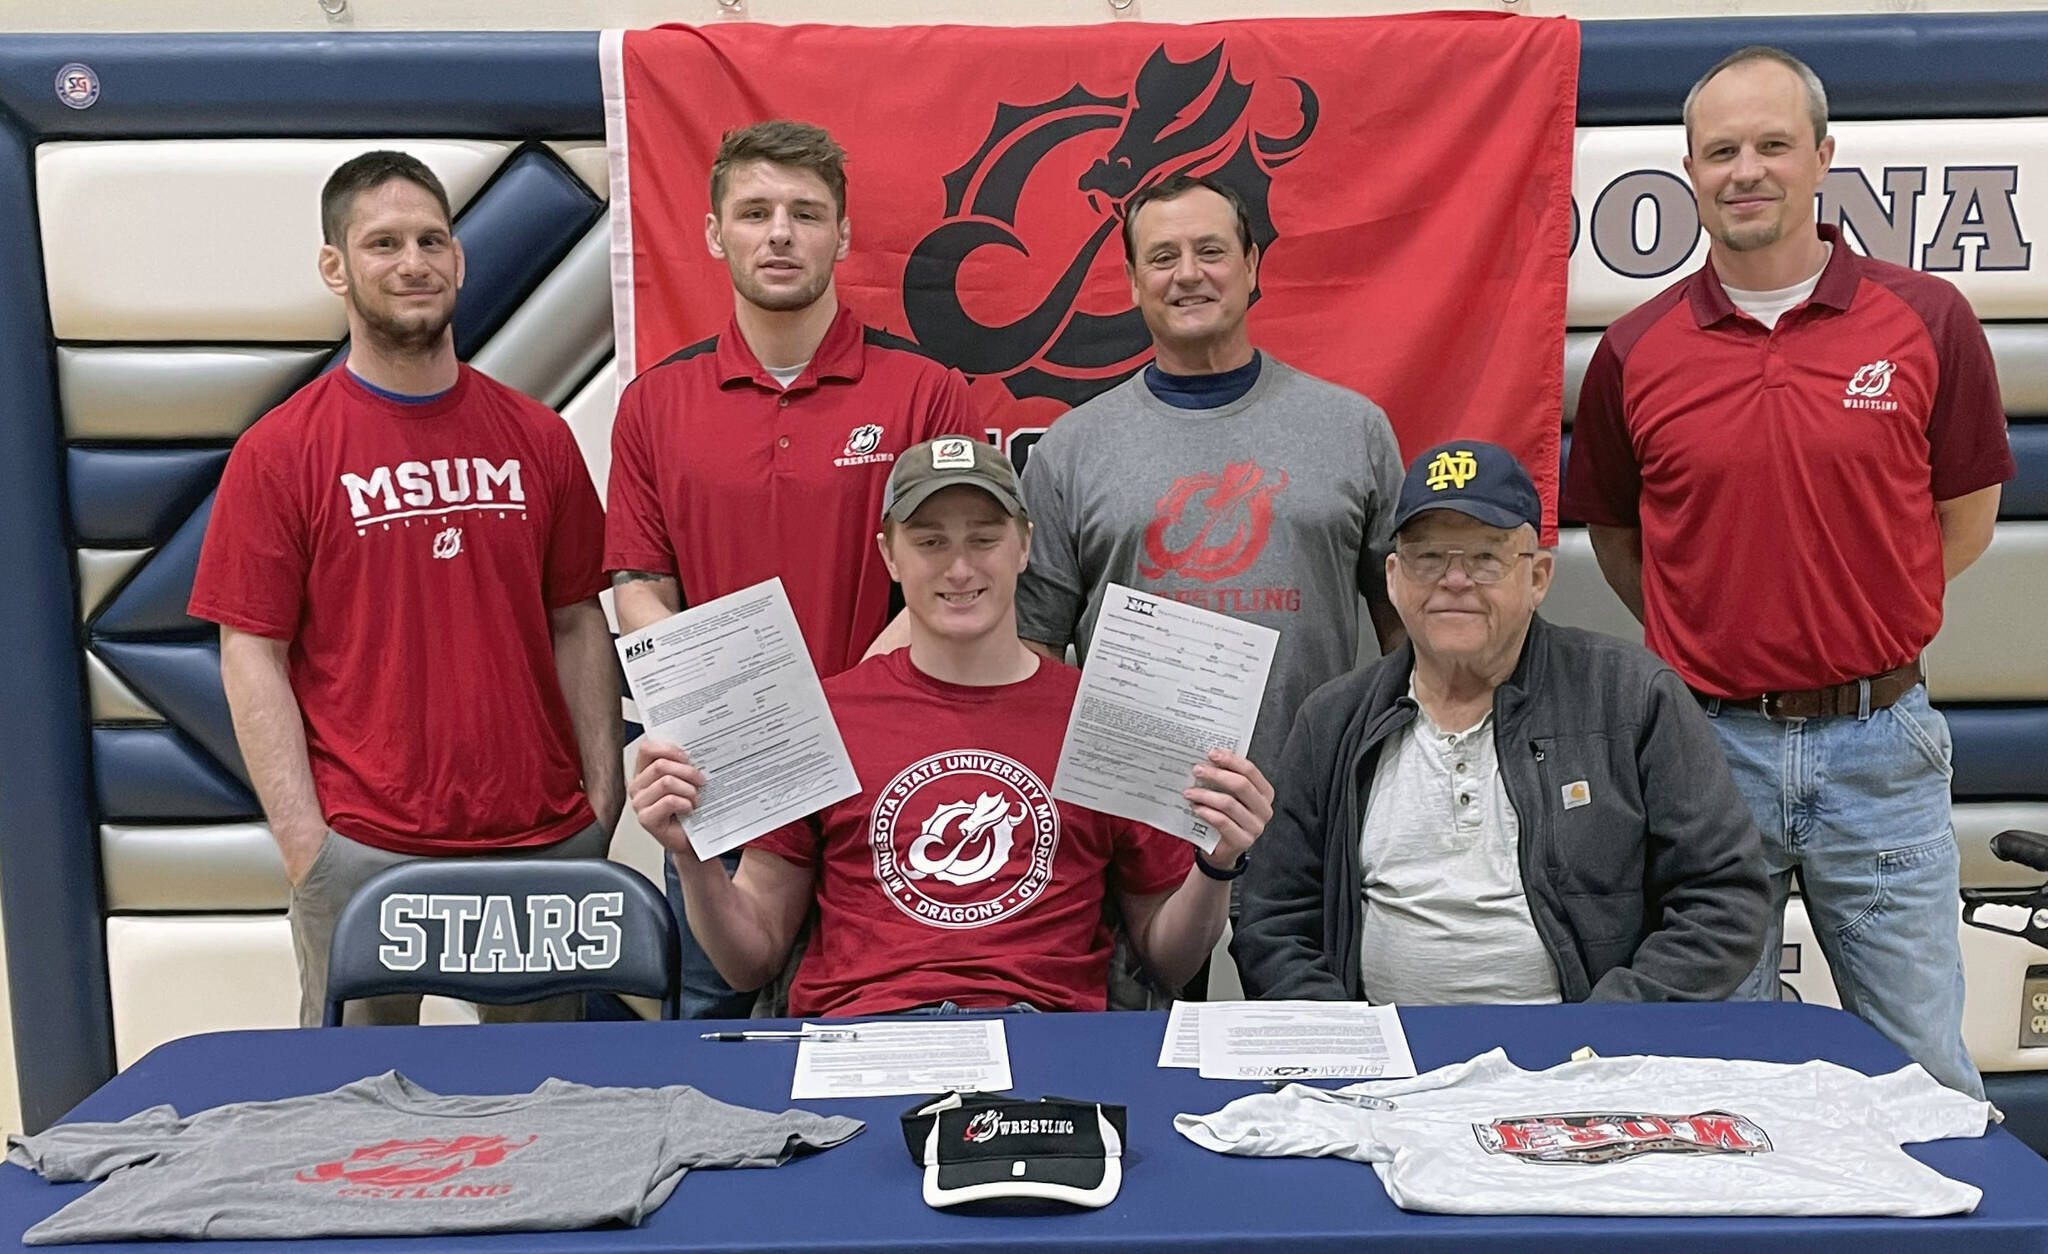 Wayne Mellon, seated at the table with stepfather Michael Gebhard, signs a National Letter of Intent on Tuesday, May 4, 2022, at Soldotna High School in Soldotna, Alaska. In back are SoHi wrestling coaches Aaron Gordon, Logan Parks, Neldon Gardner and Pete Dickinson. (Photo provided)